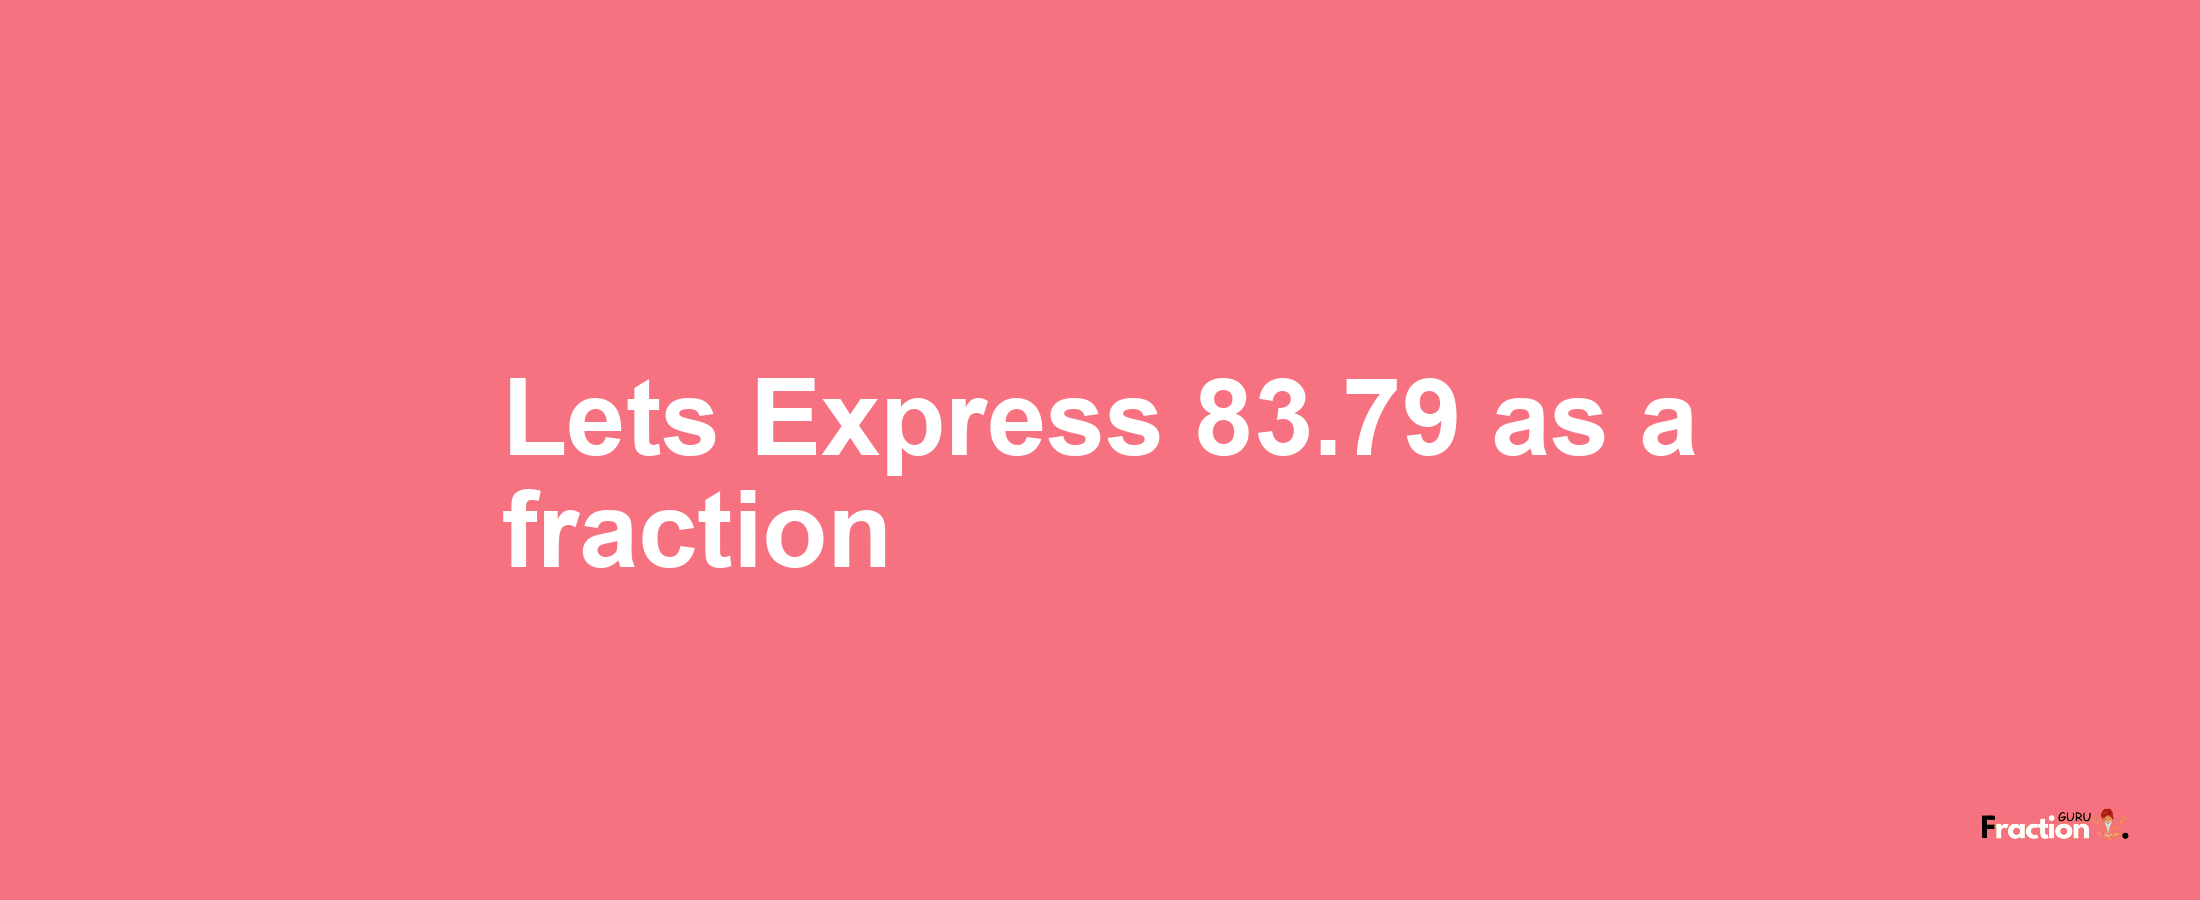 Lets Express 83.79 as afraction